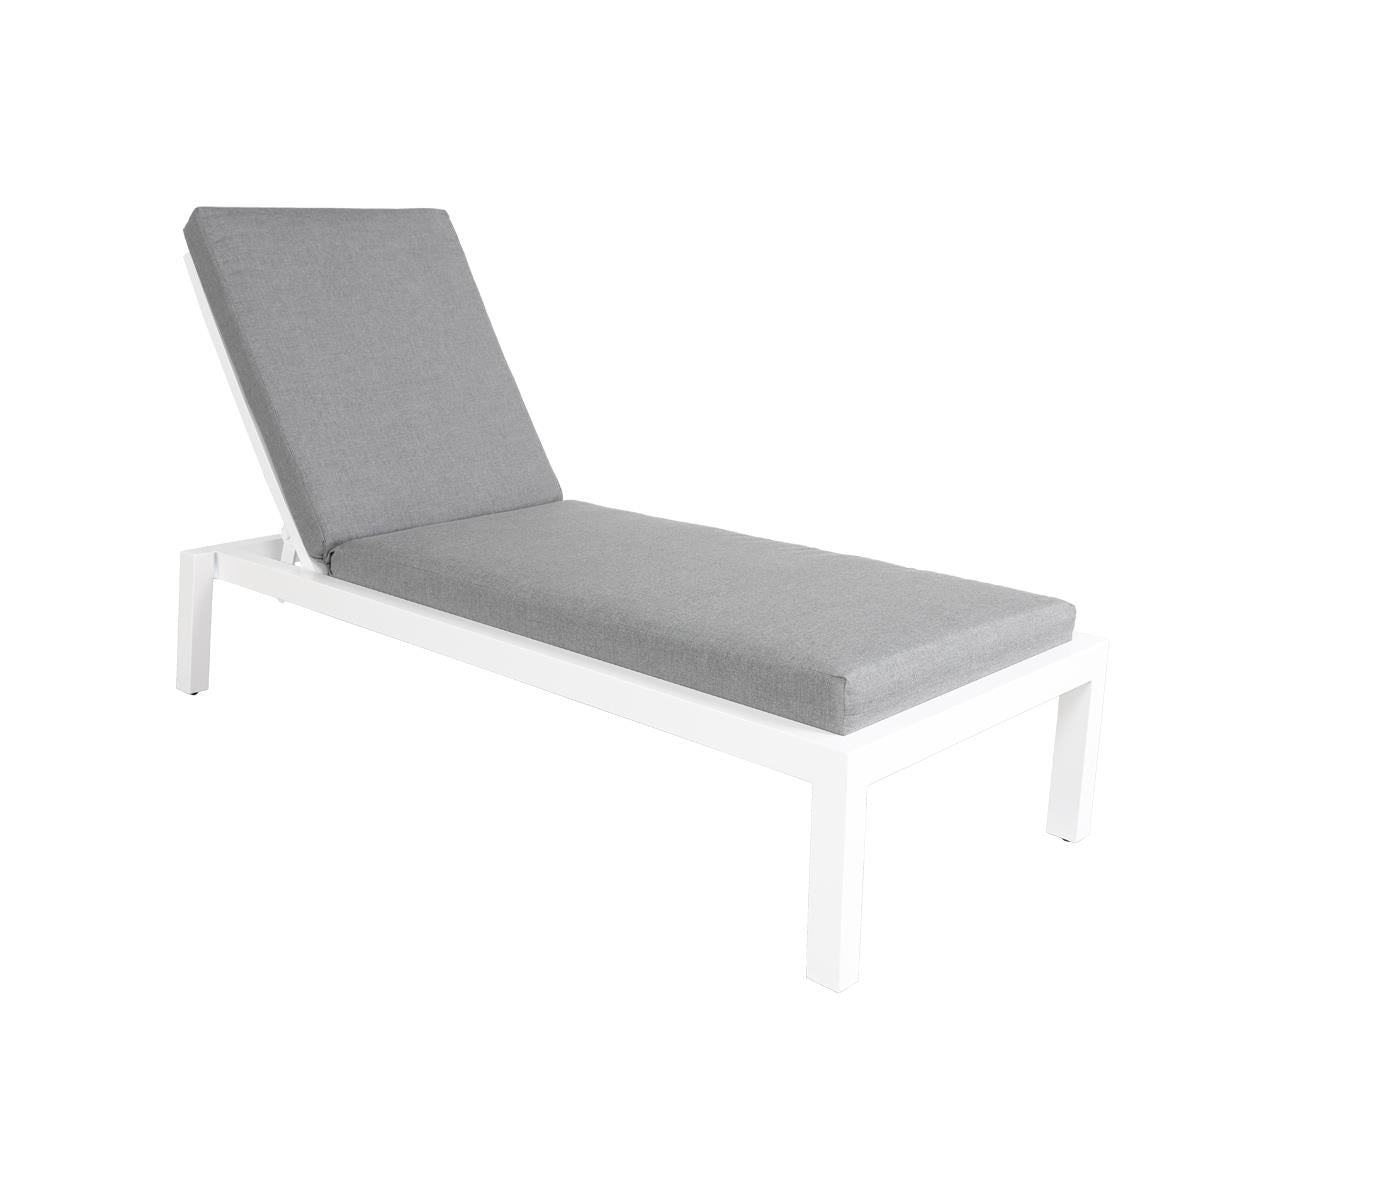 Gramercy Outdoor Lounge Chair